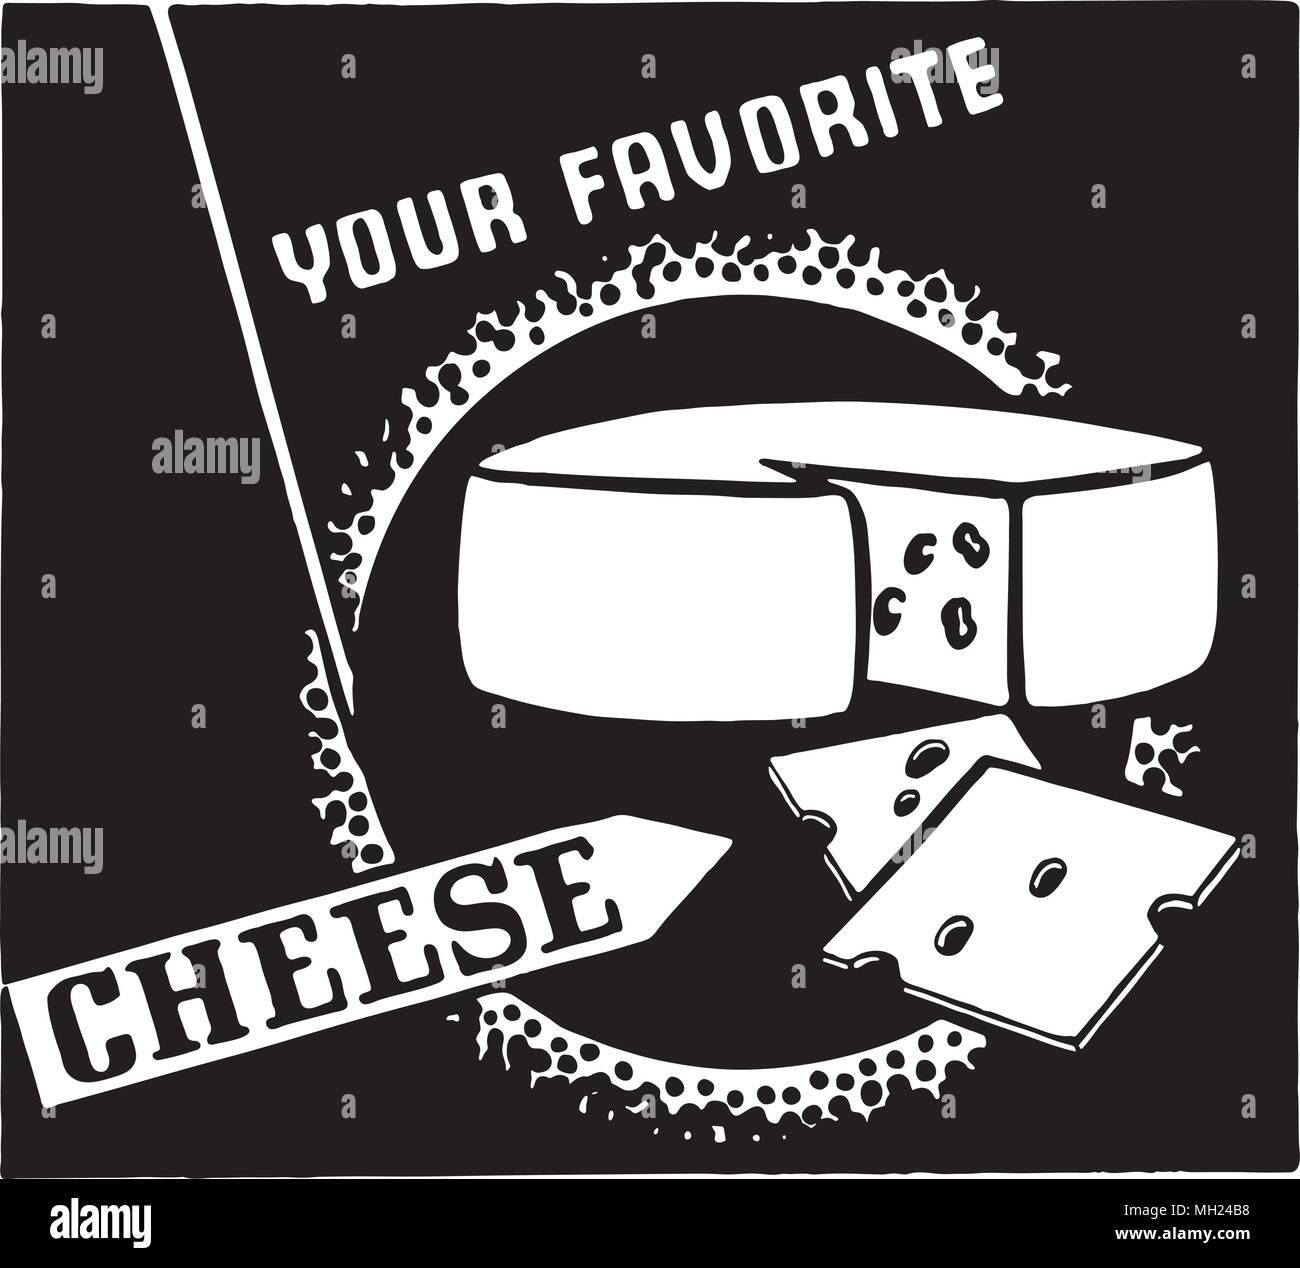 Your Favorite Cheese - Retro Ad Art Banner Stock Vector